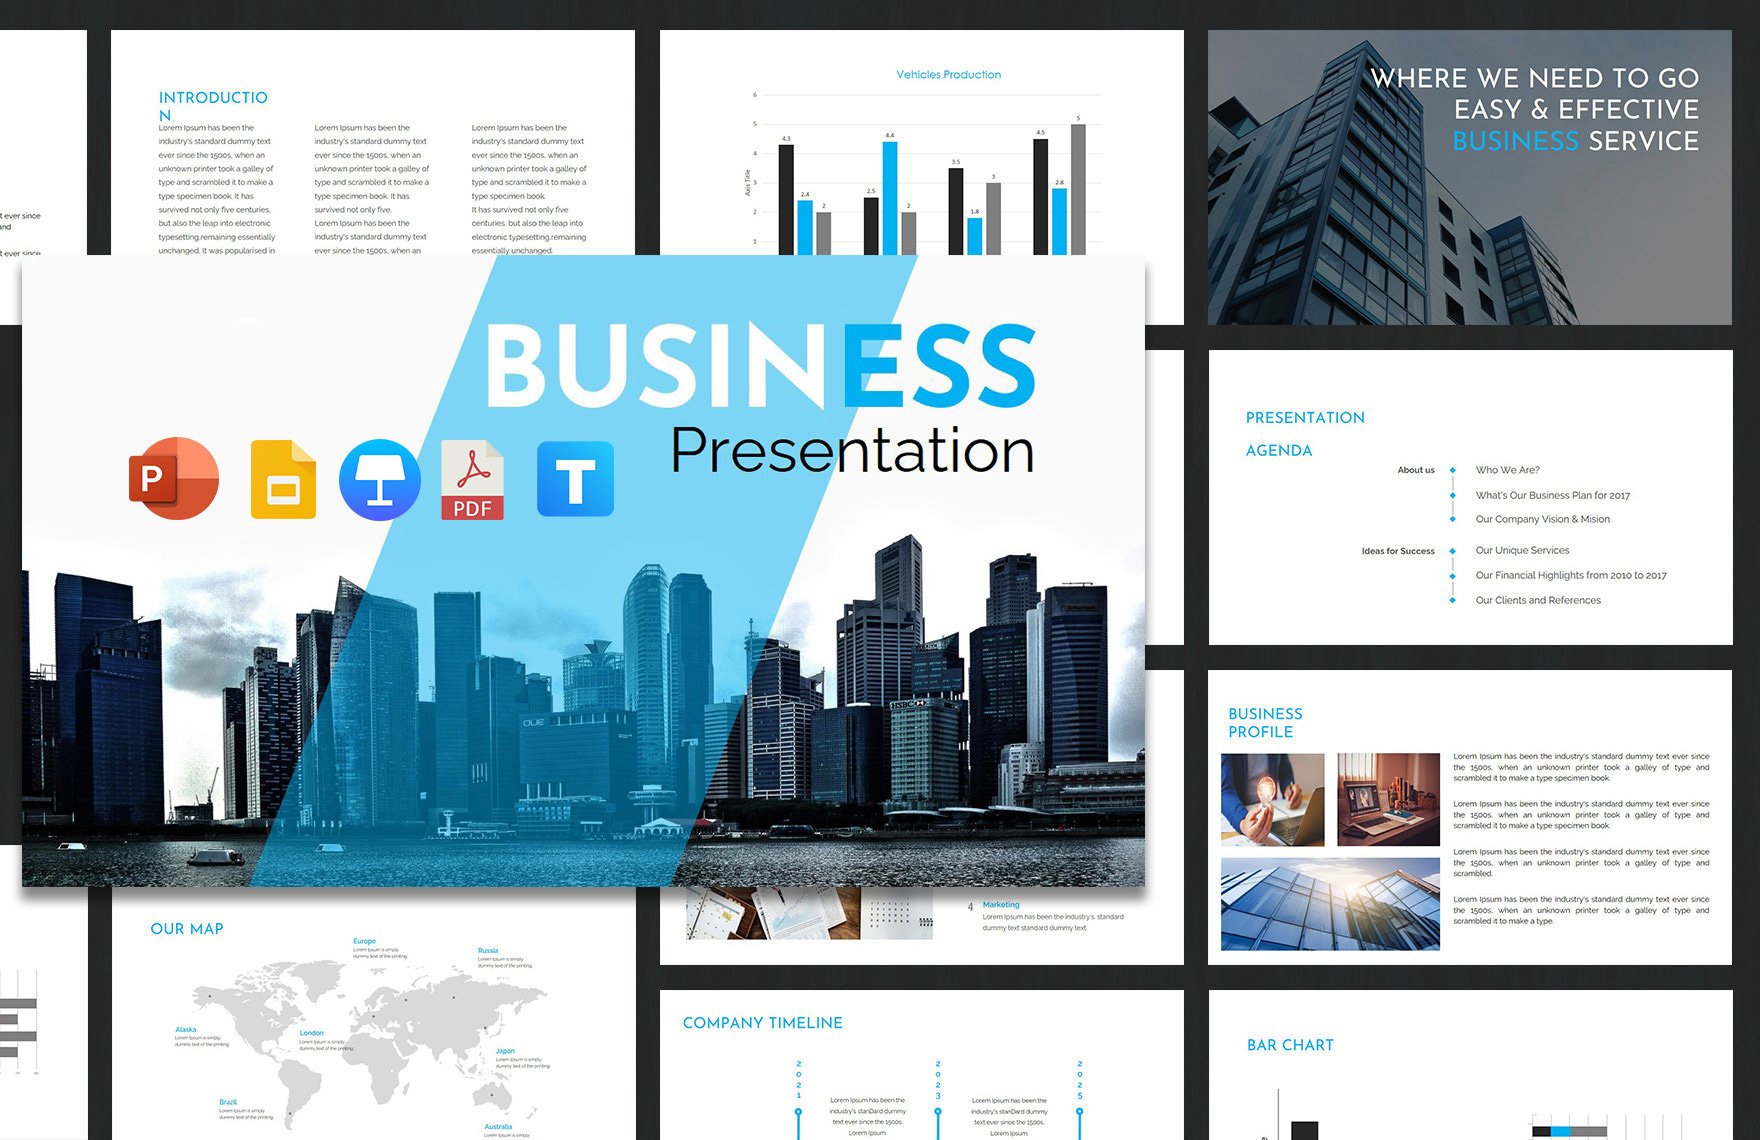 Business Template